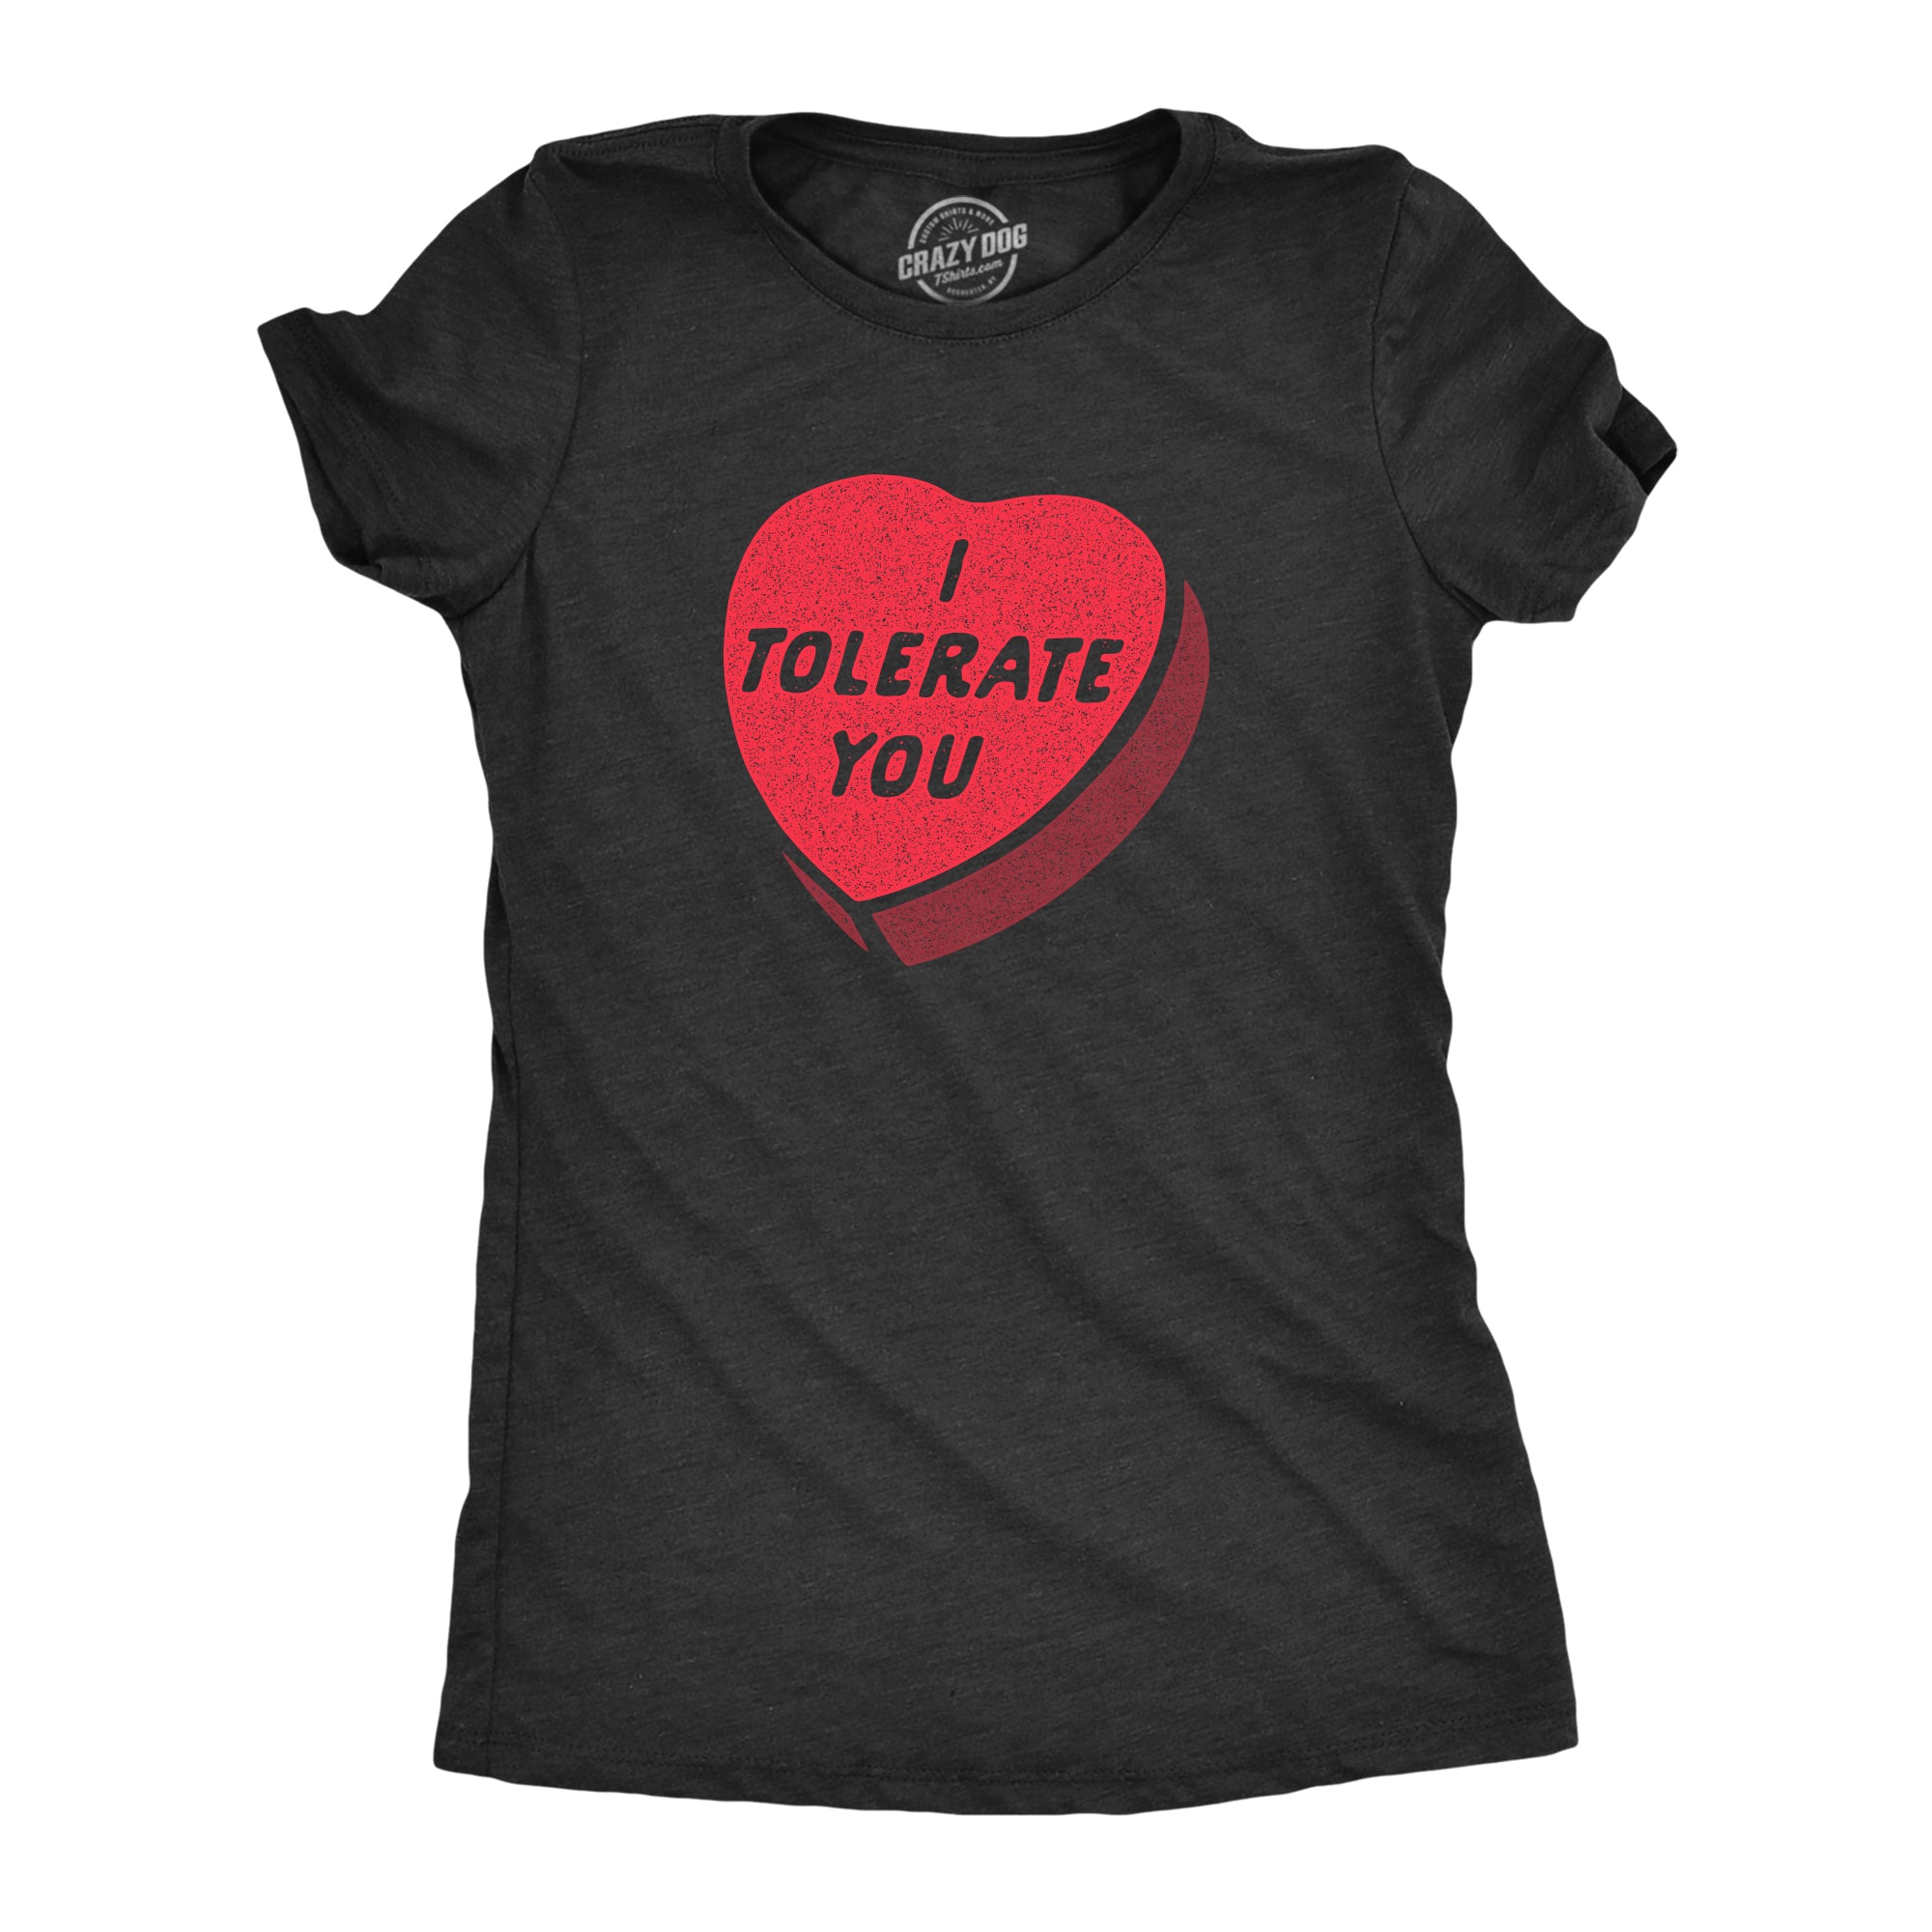 Funny Heather Black I Tolerate You Womens T Shirt Nerdy Valentine's Day Nerdy Tee